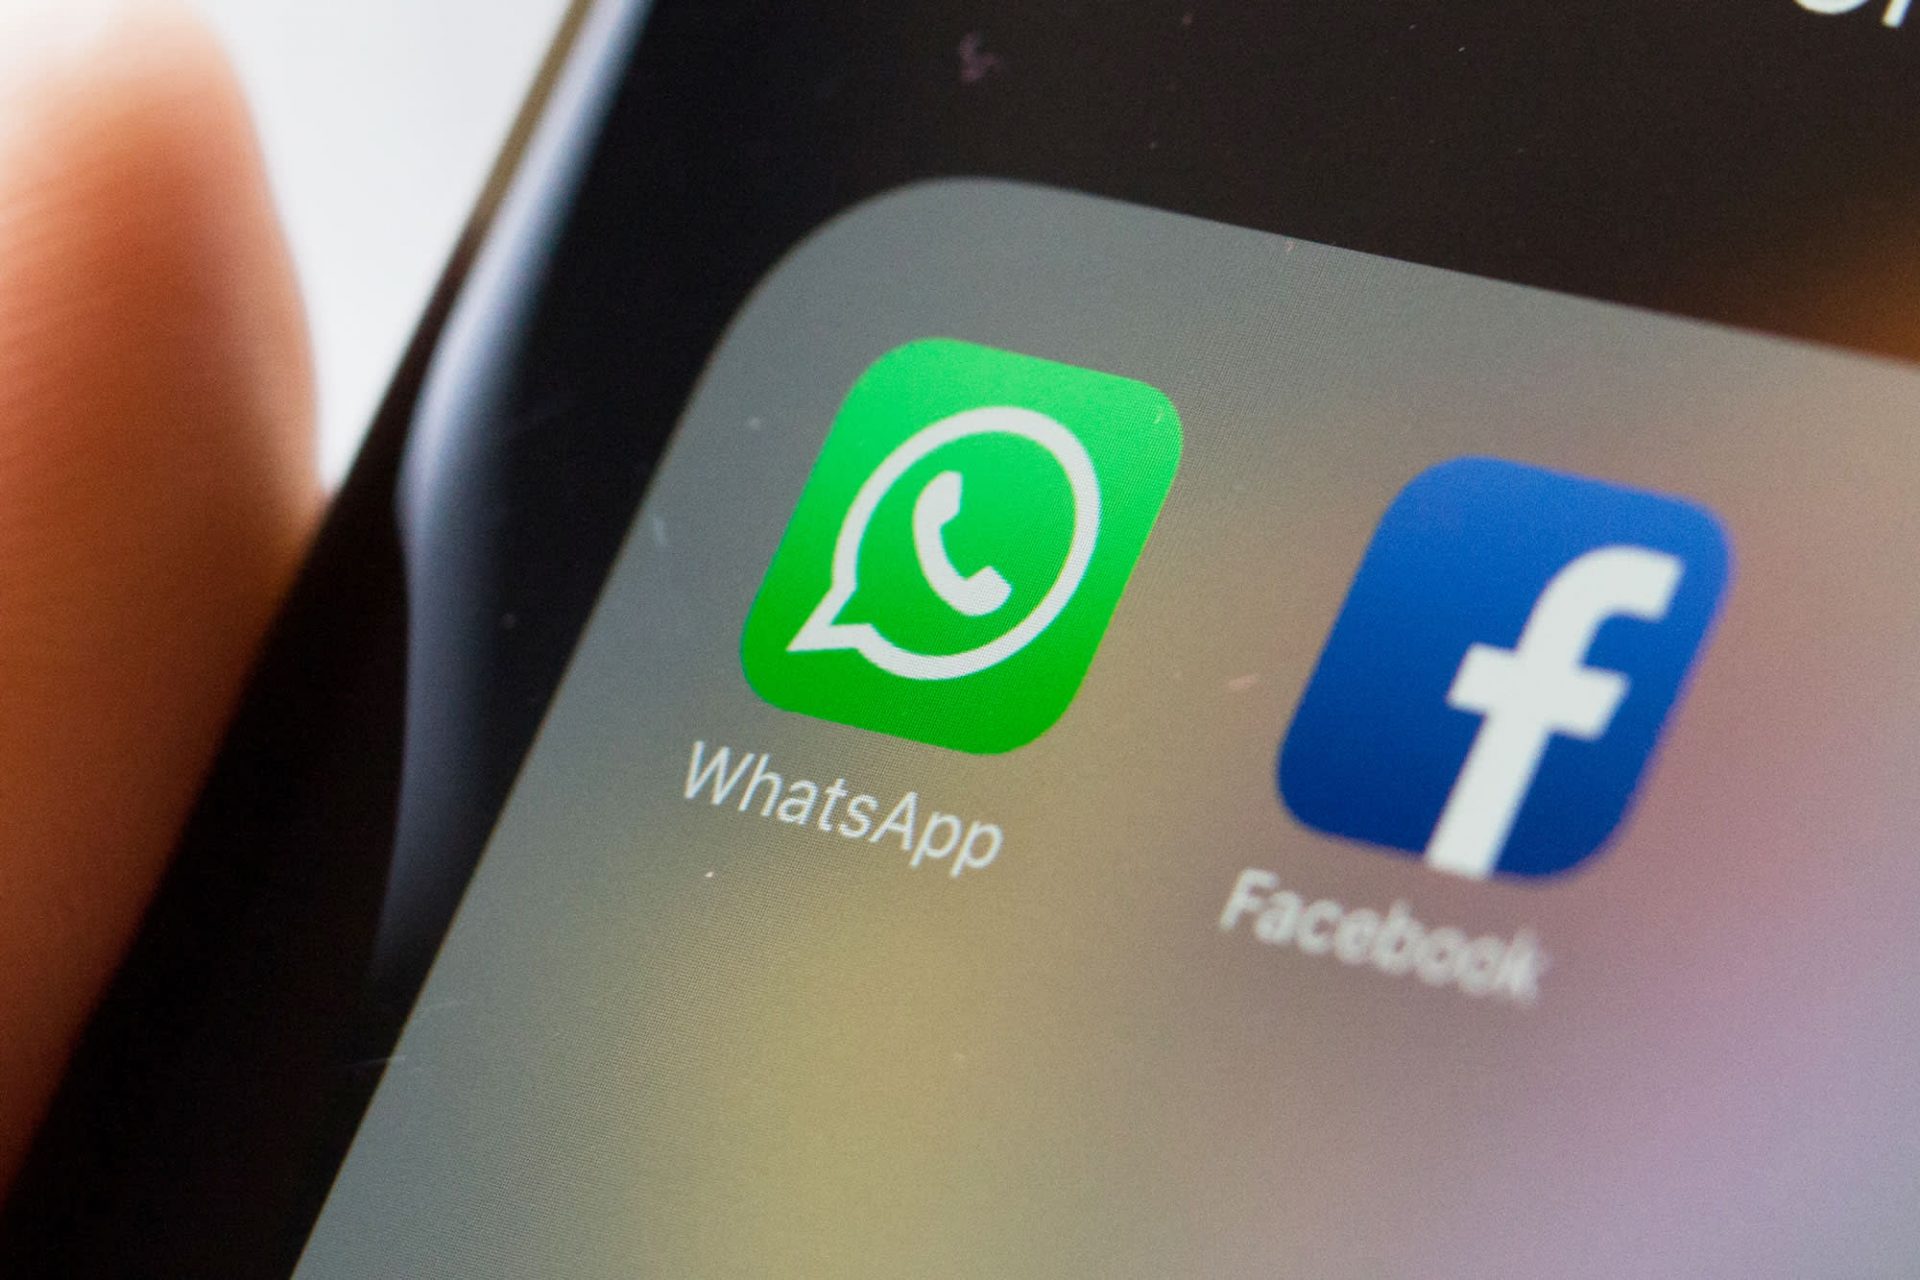 WhatsApp delays privacy change over user ‘confusion’ and backlash about Fb files sharing